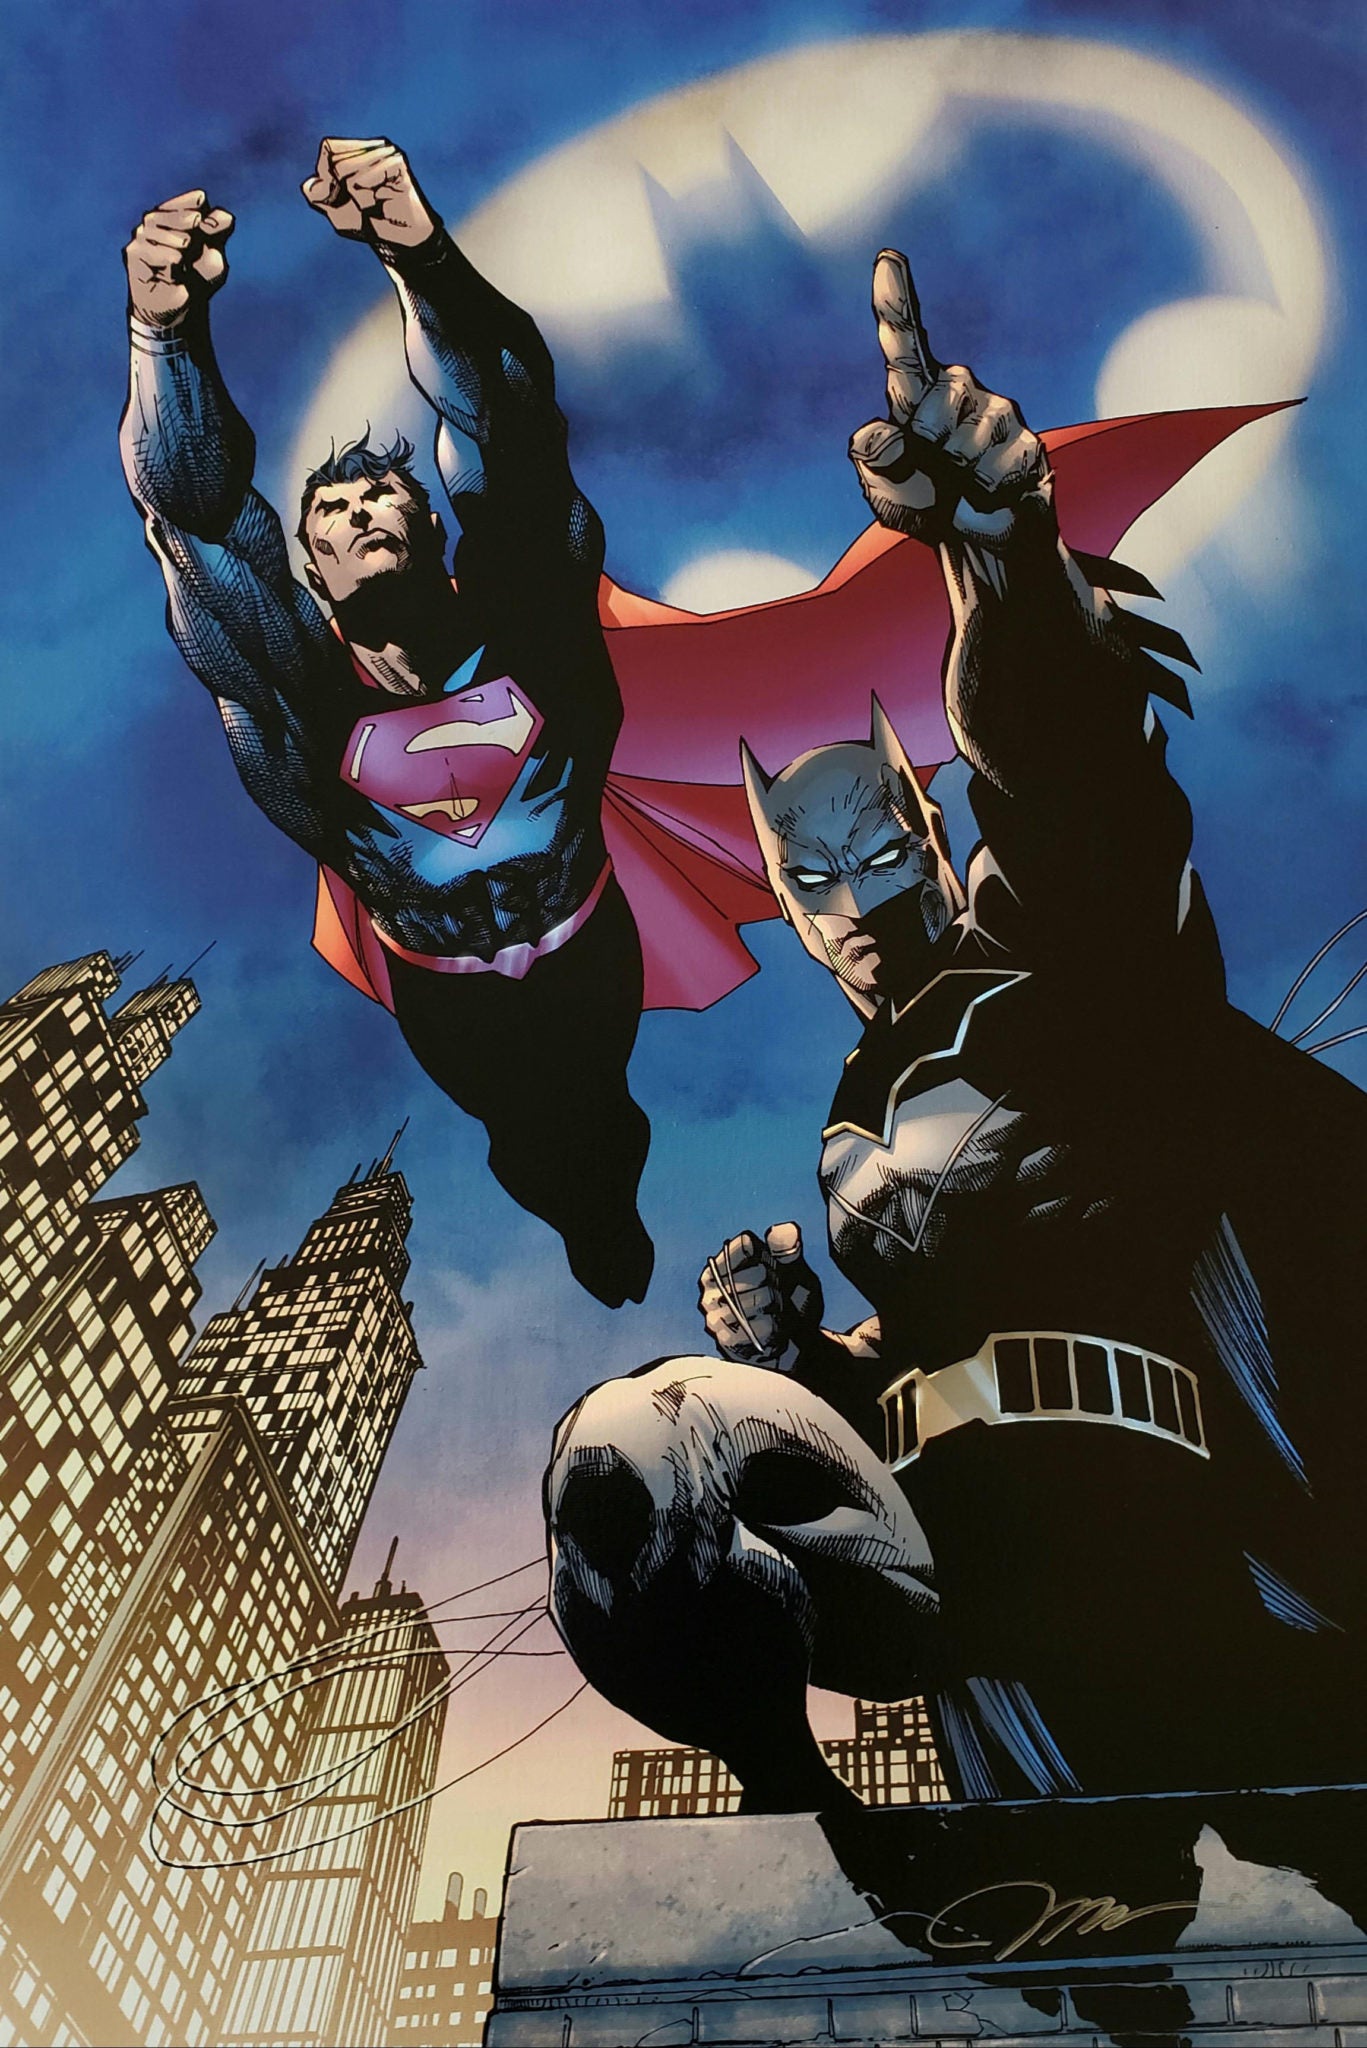 The familiar shape illuminates the sky above city, being the caped crusader's Batman and Superman together again.